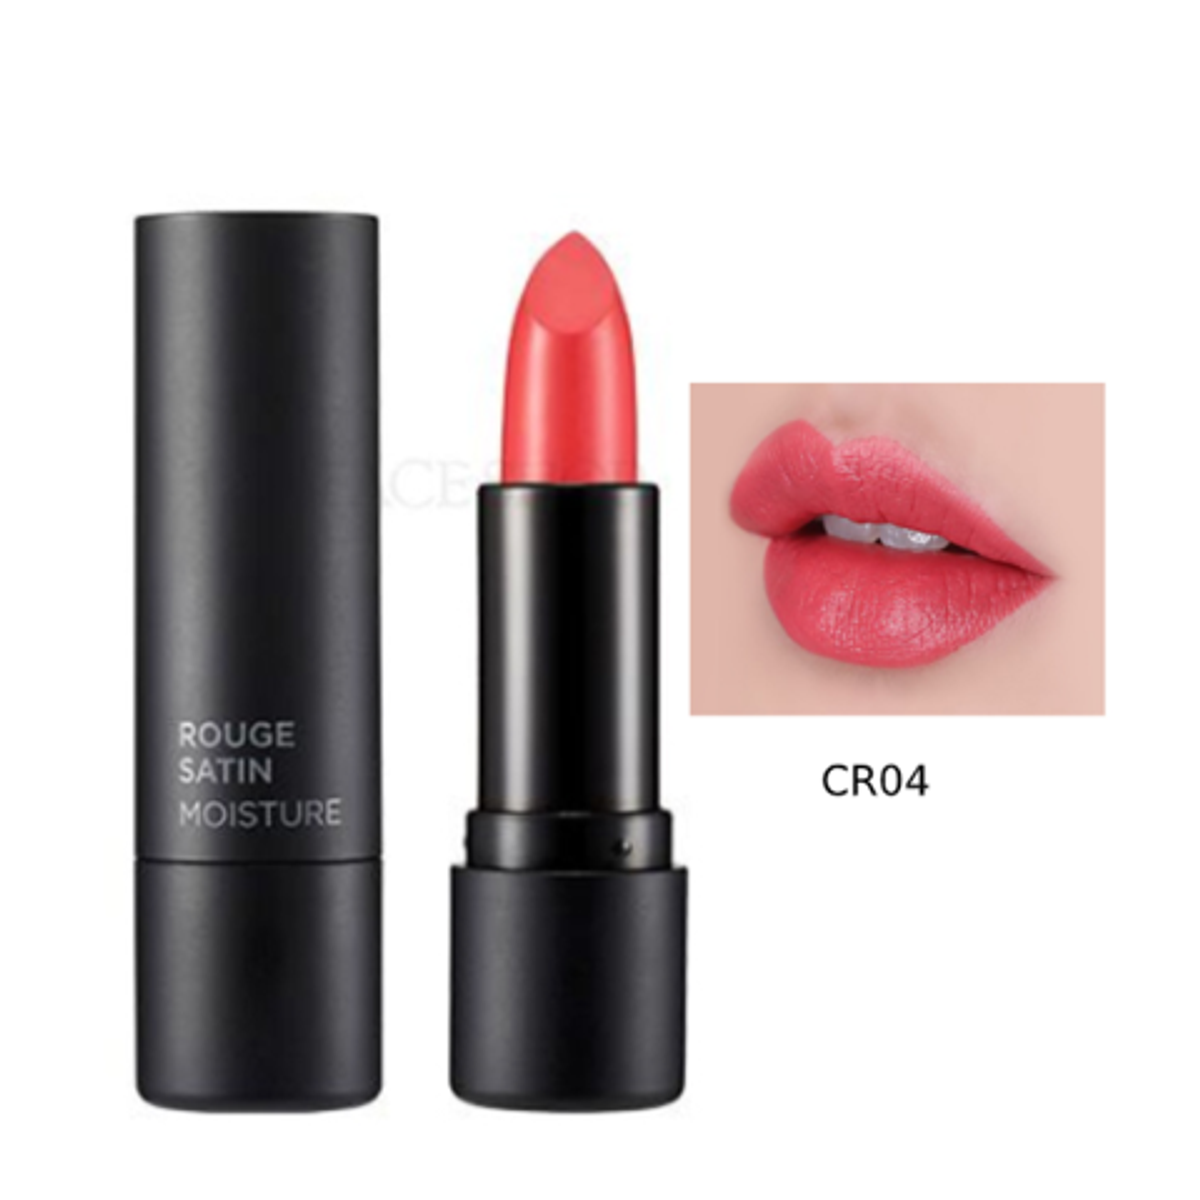 gift-fmgt-son-thoi-duong-am-rouge-satin-moisture-3-6g-cr04-dear-coral-1